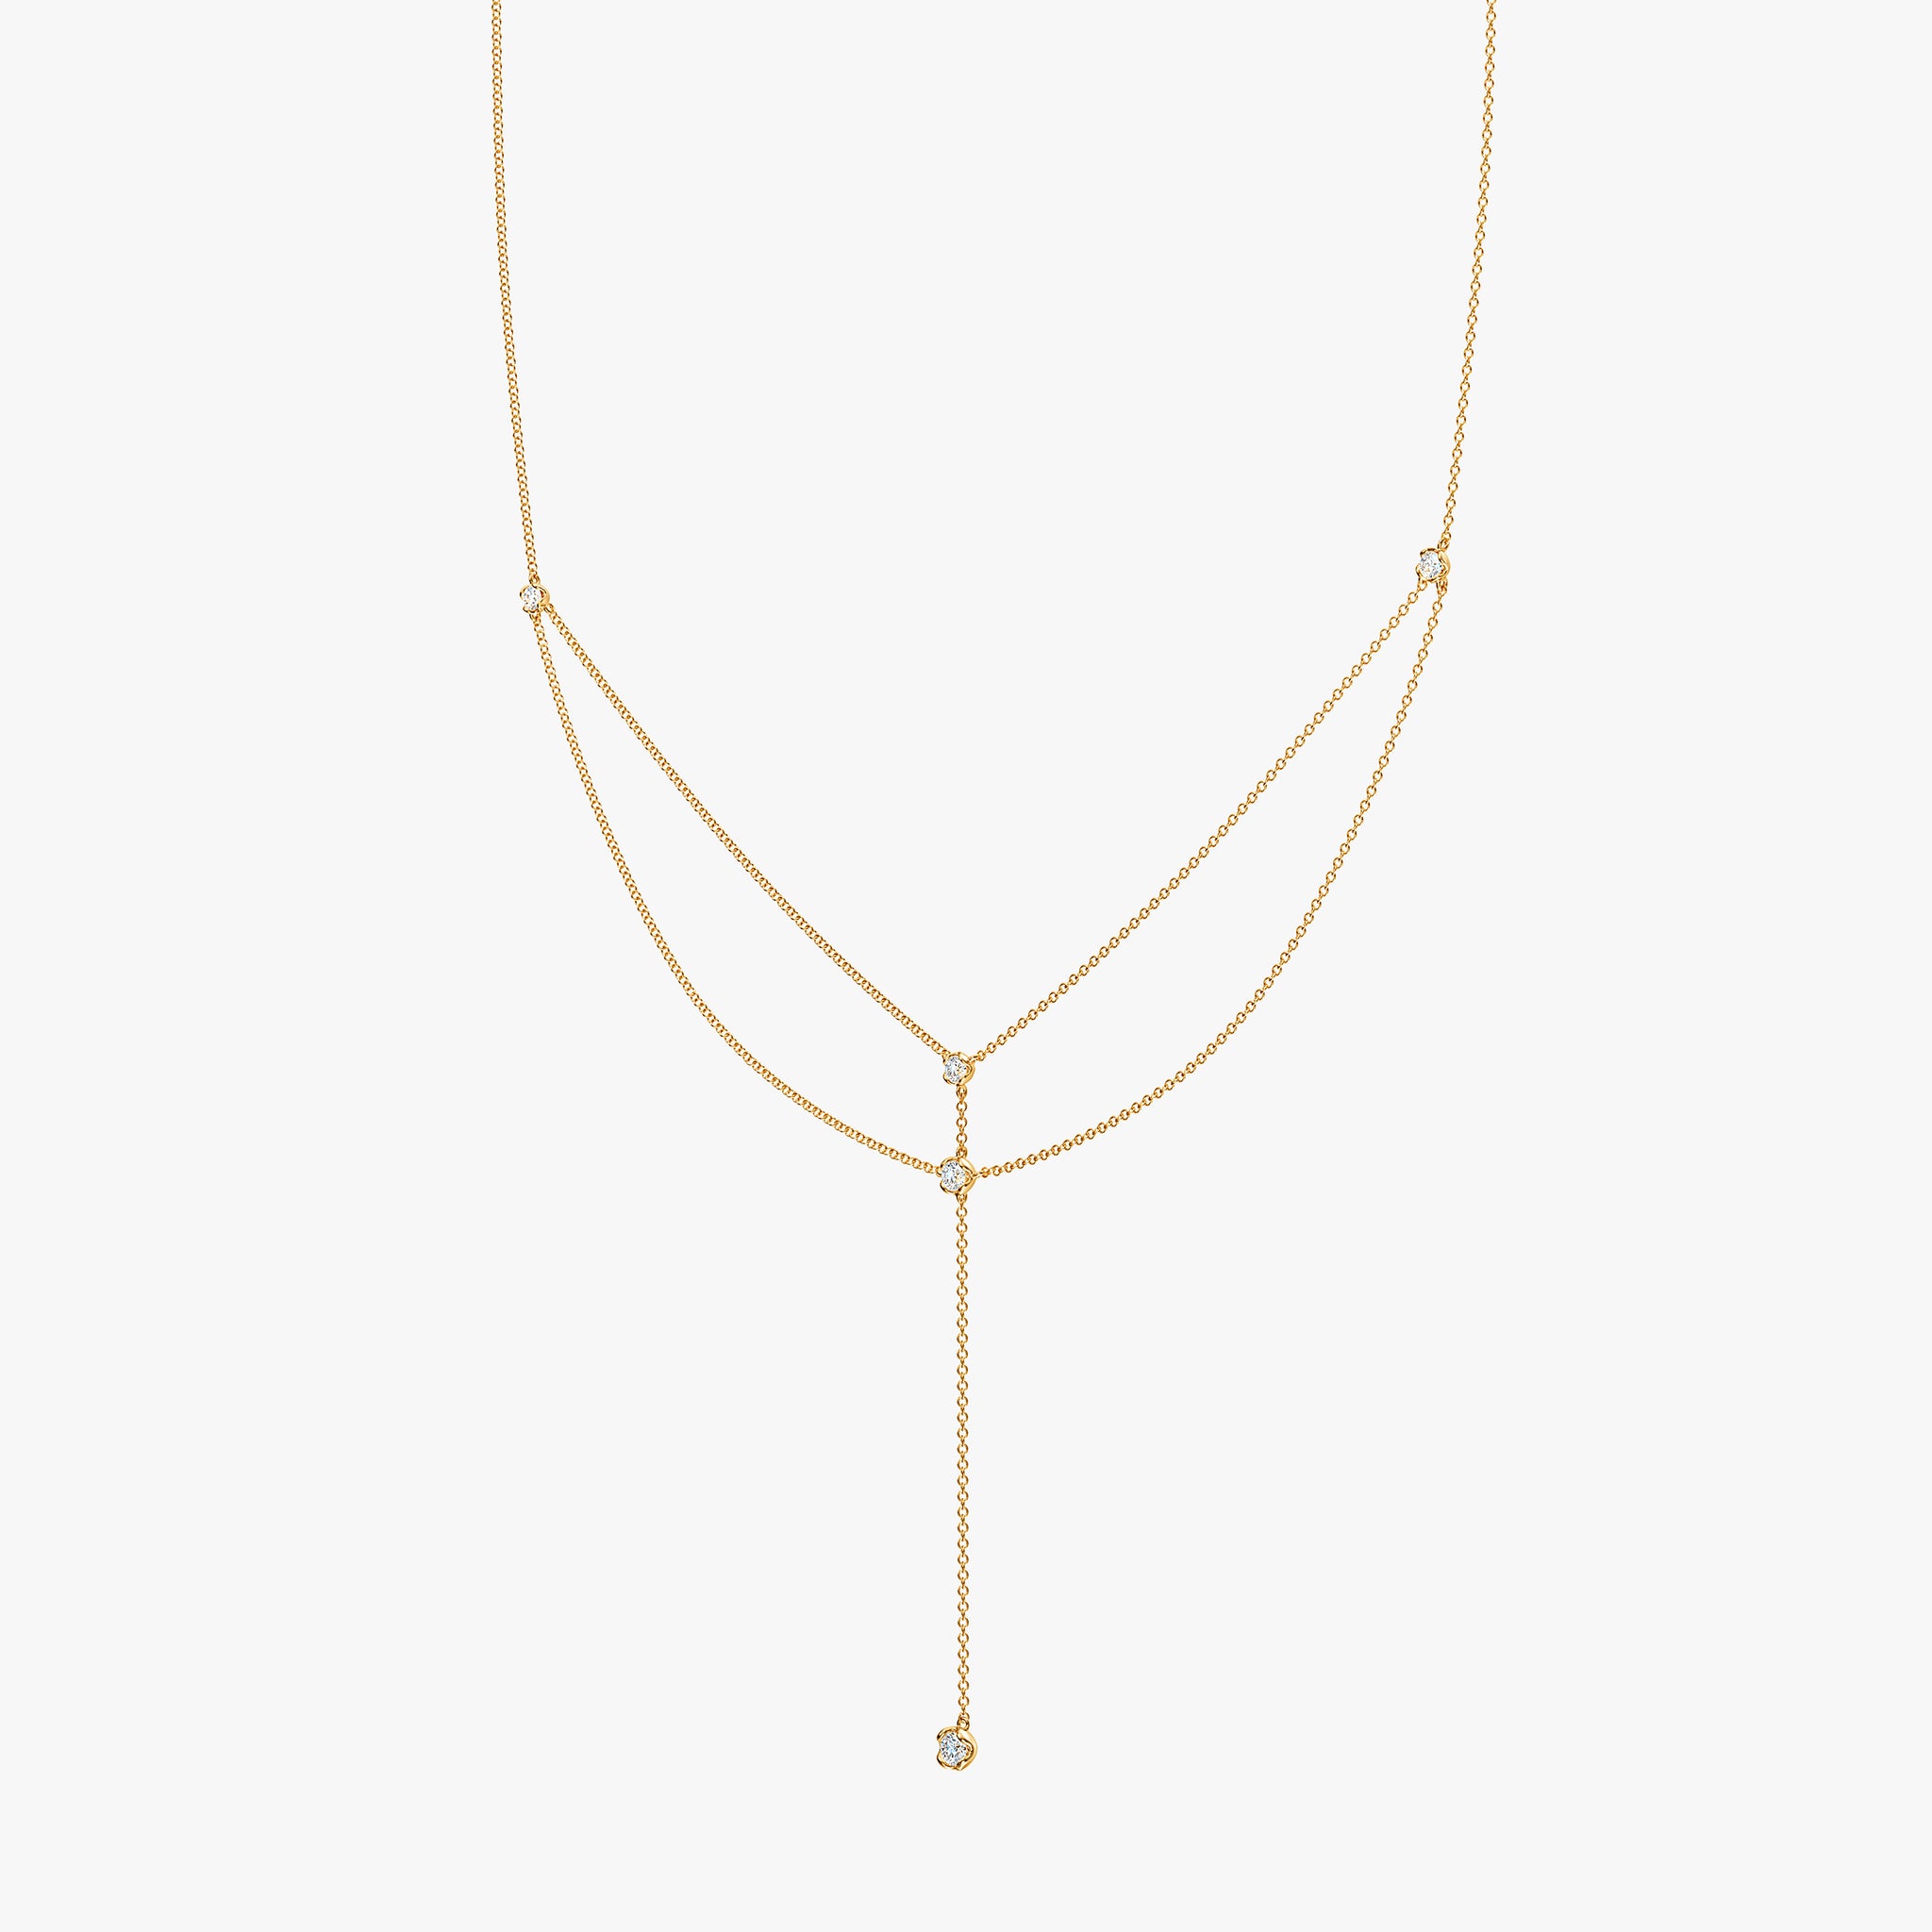 J'EVAR 14KT Yellow Gold Double-Layered Lariat ALTR Lab Grown Diamond Necklace Perspective View